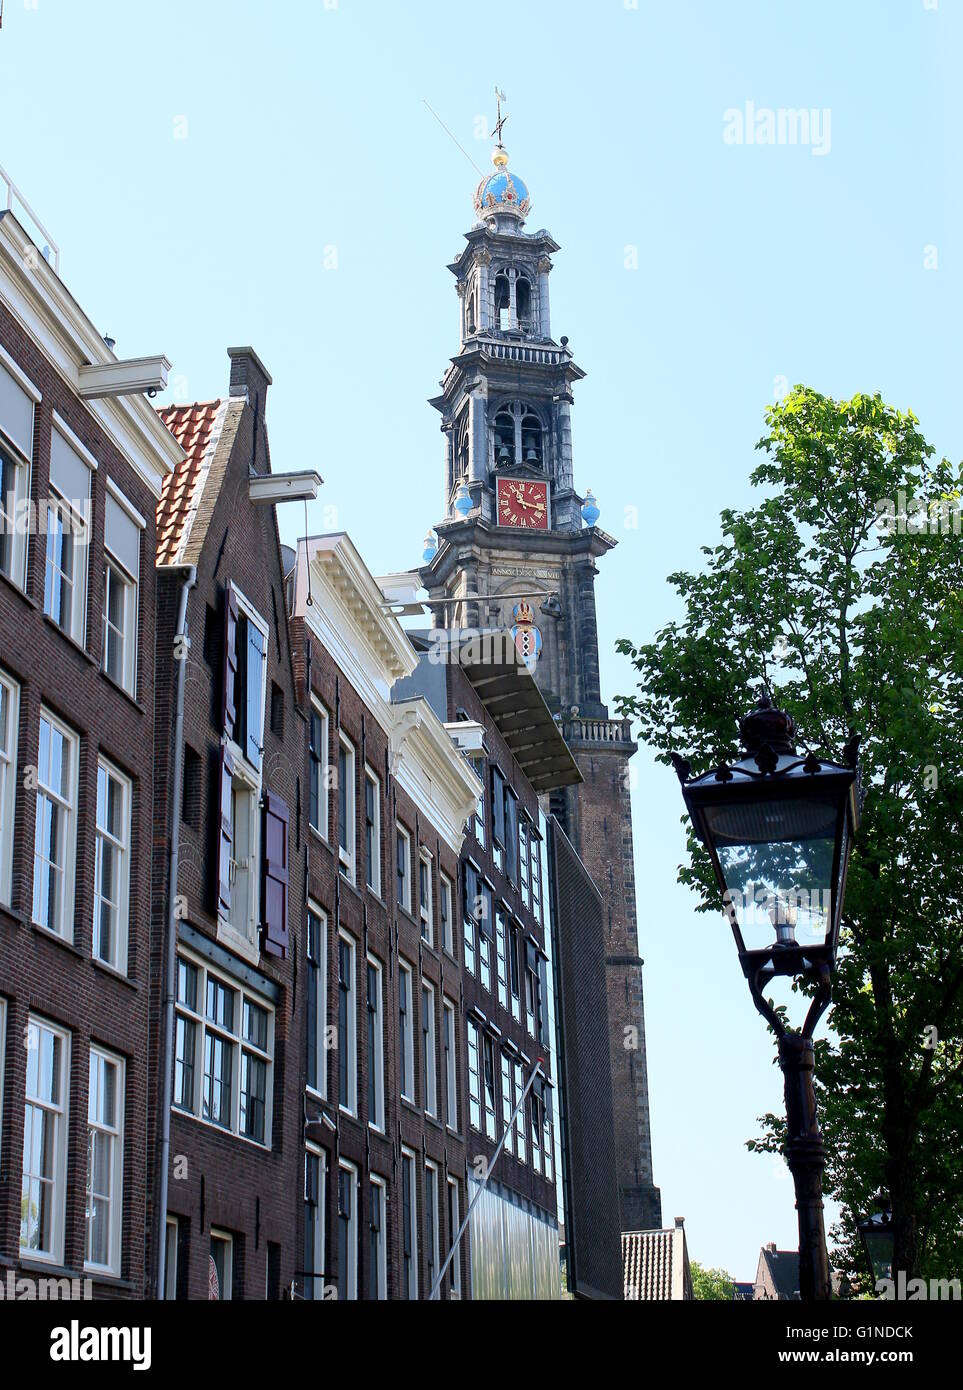 Prinsengracht canal with upper stories of Anne Frankhuis - Anne Frank Museum,  Amsterdam, Jordaan, Netherlands. Westerkerk church tower in background Stock Photo